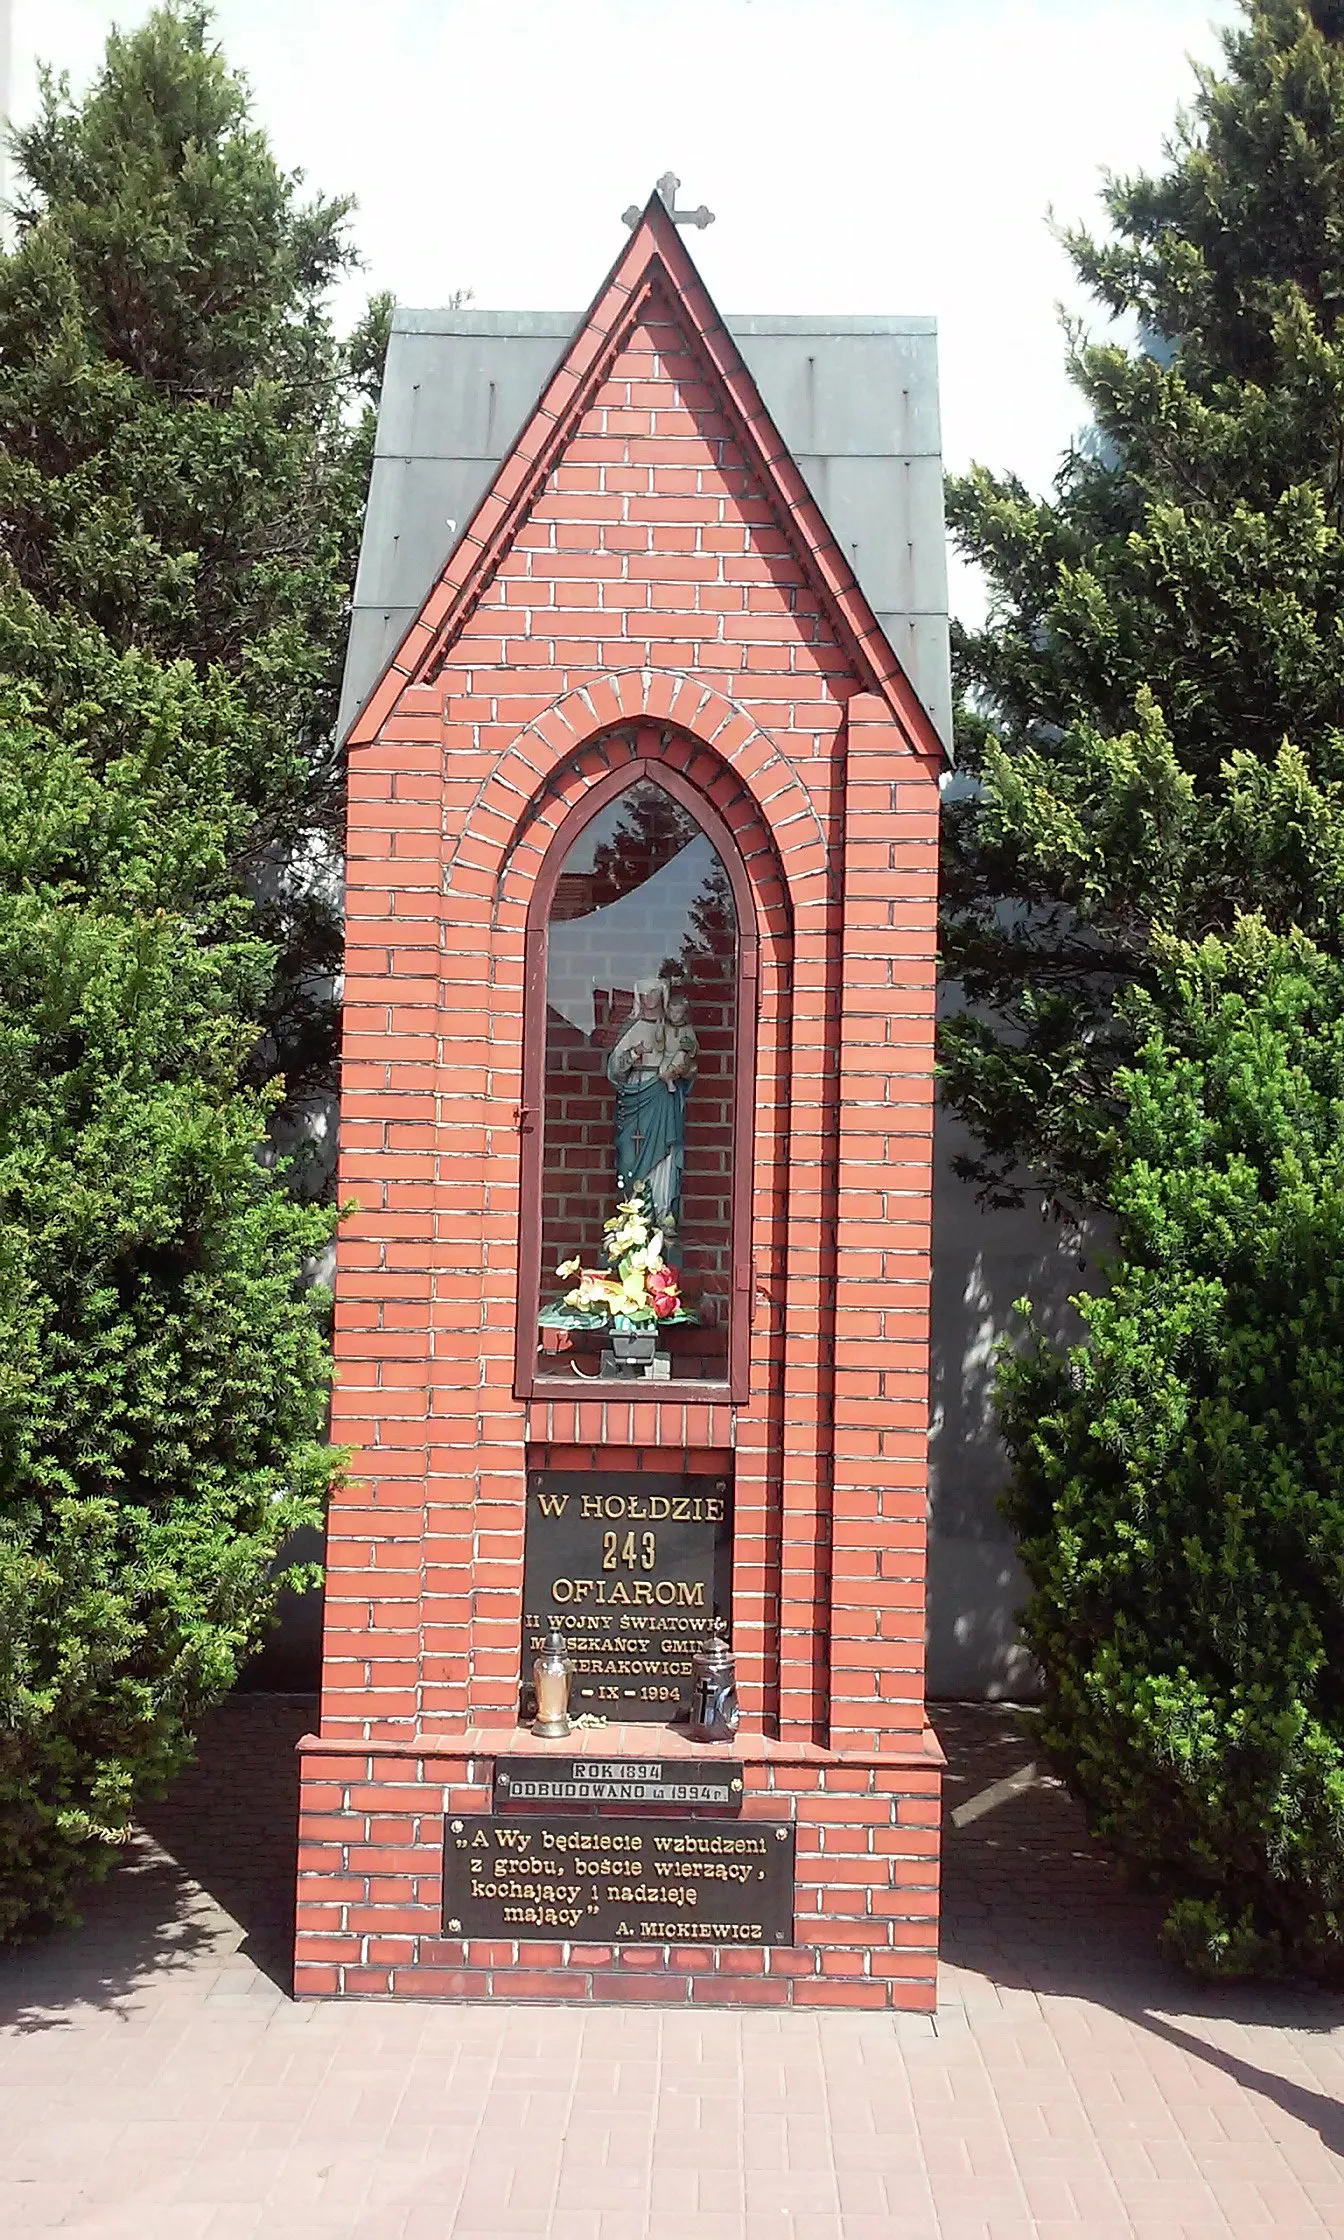 Photo showing: Sierakowice (Pomerania), Marian shrine, memorial to the victims of IIWW